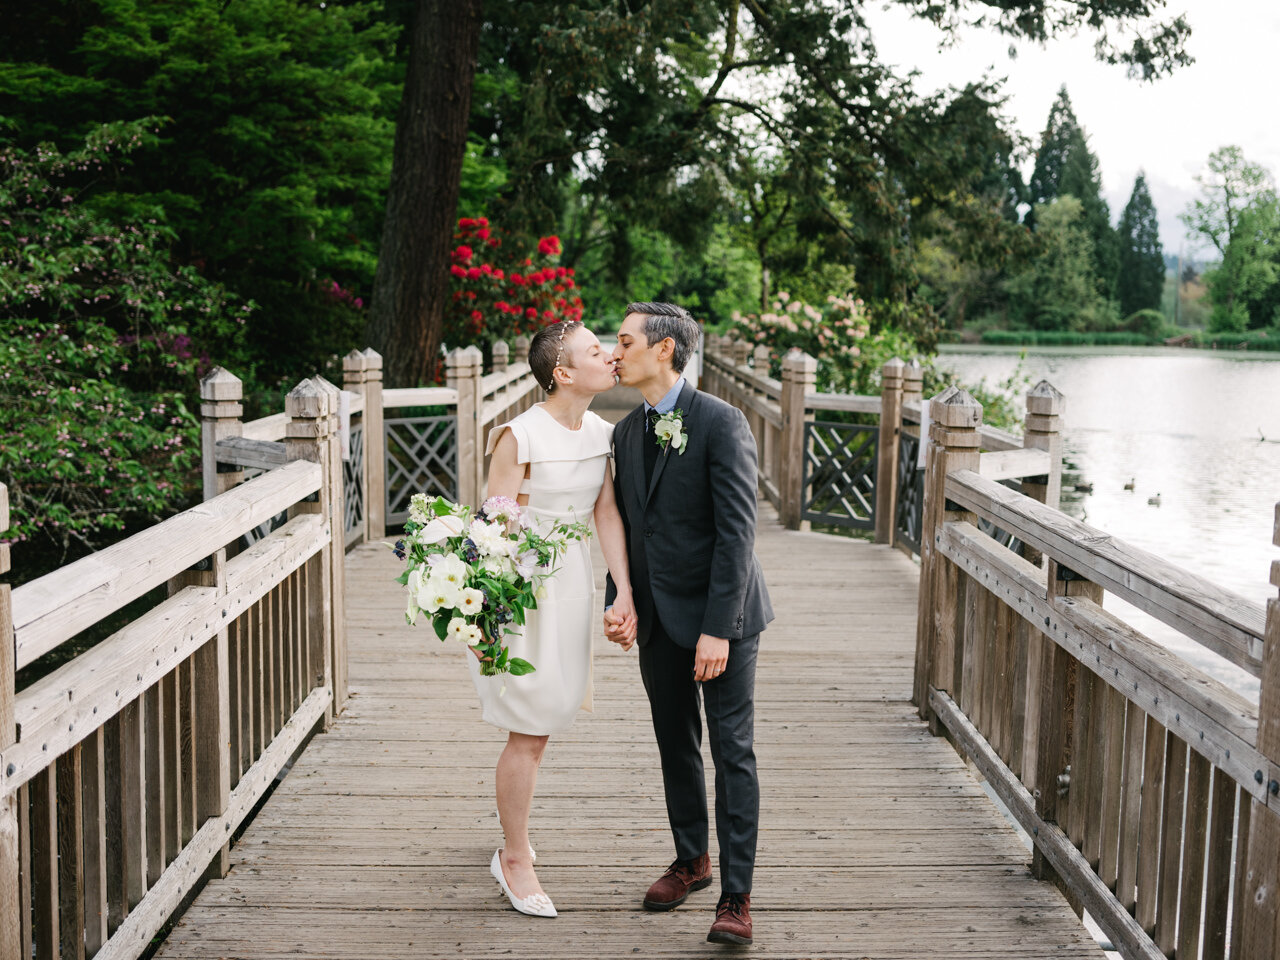  Kiss during elopement on crystal springs bridge with red rhododendrons and lake behind them 